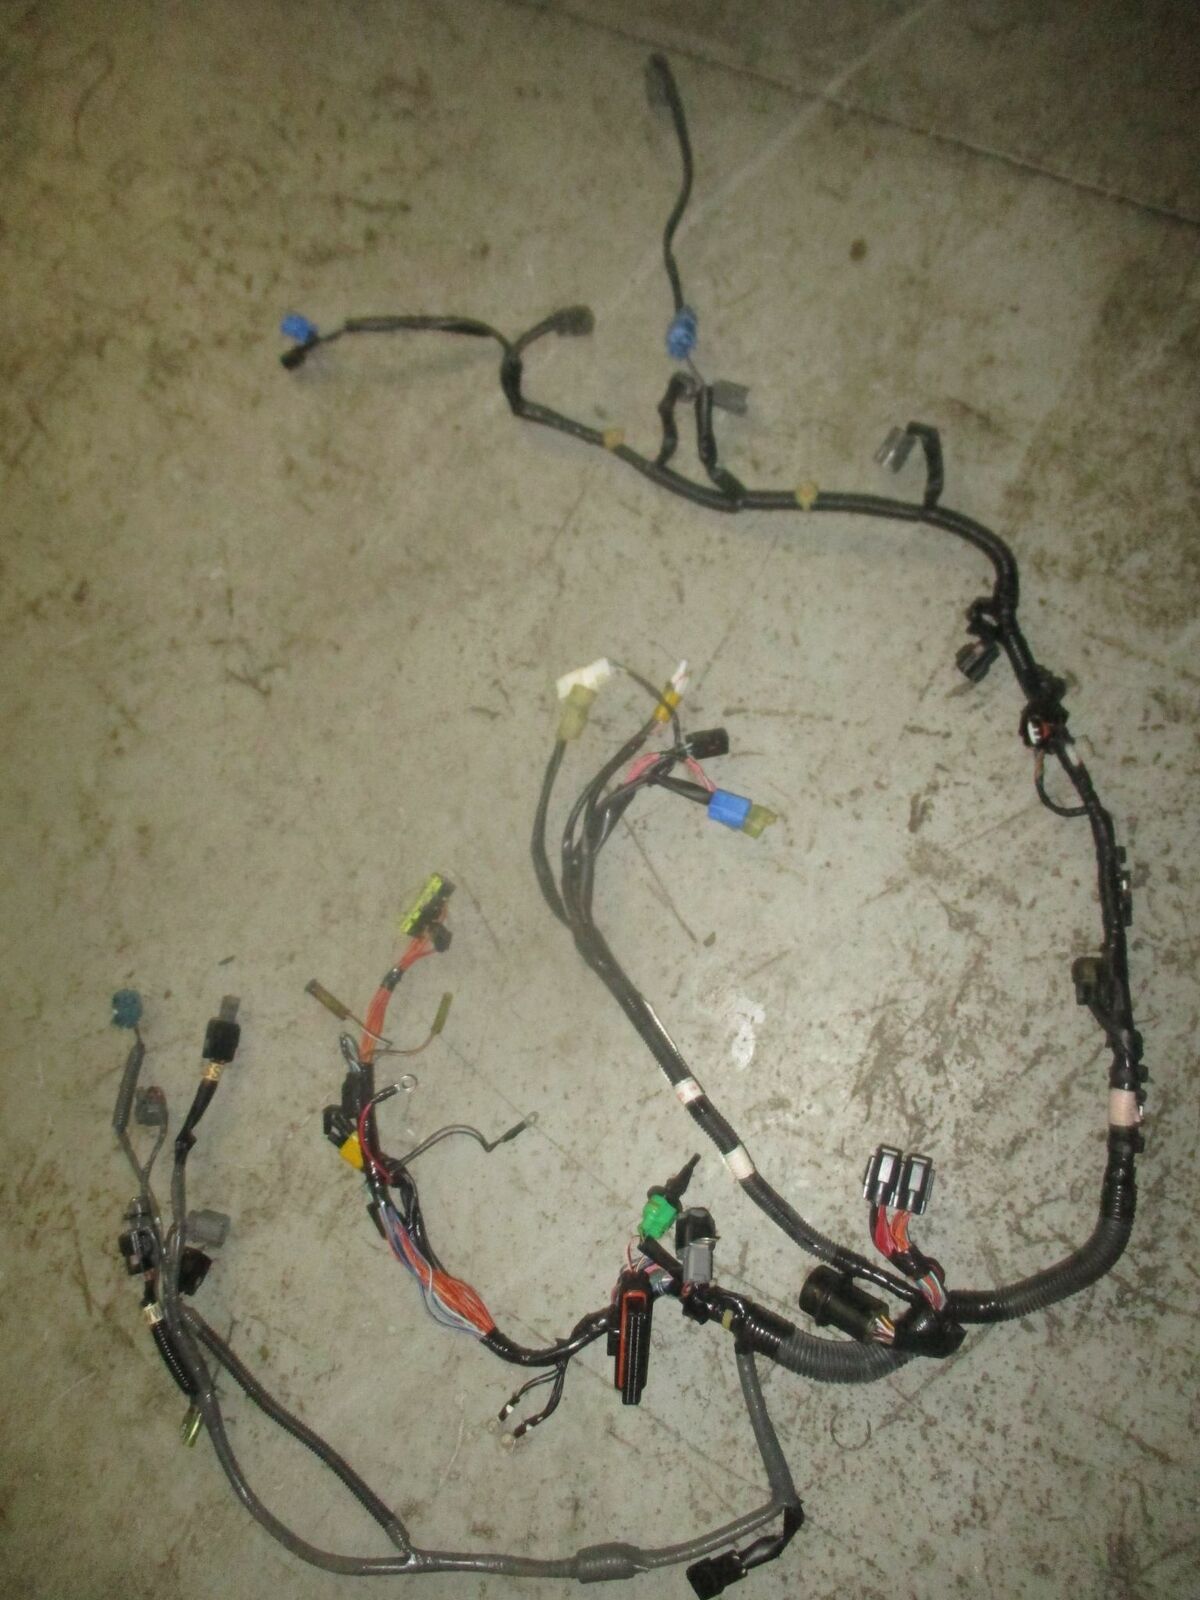 Yamaha 150hp 4 stroke outboard engine wiring harness (63P-82590-60)